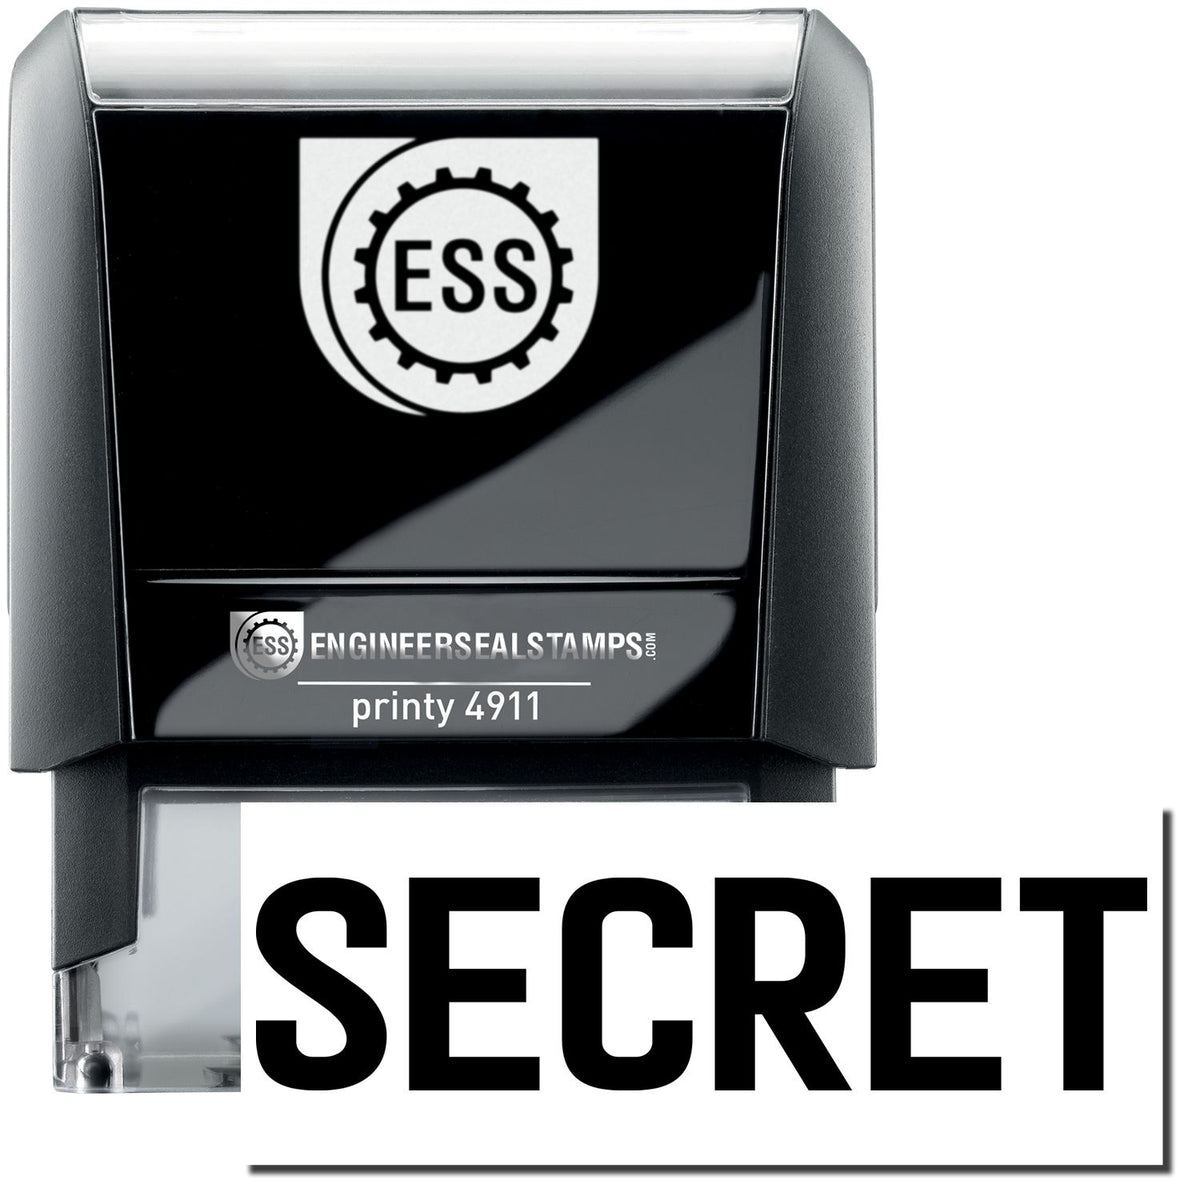 A self-inking stamp with a stamped image showing how the text &quot;SECRET&quot; is displayed after stamping.